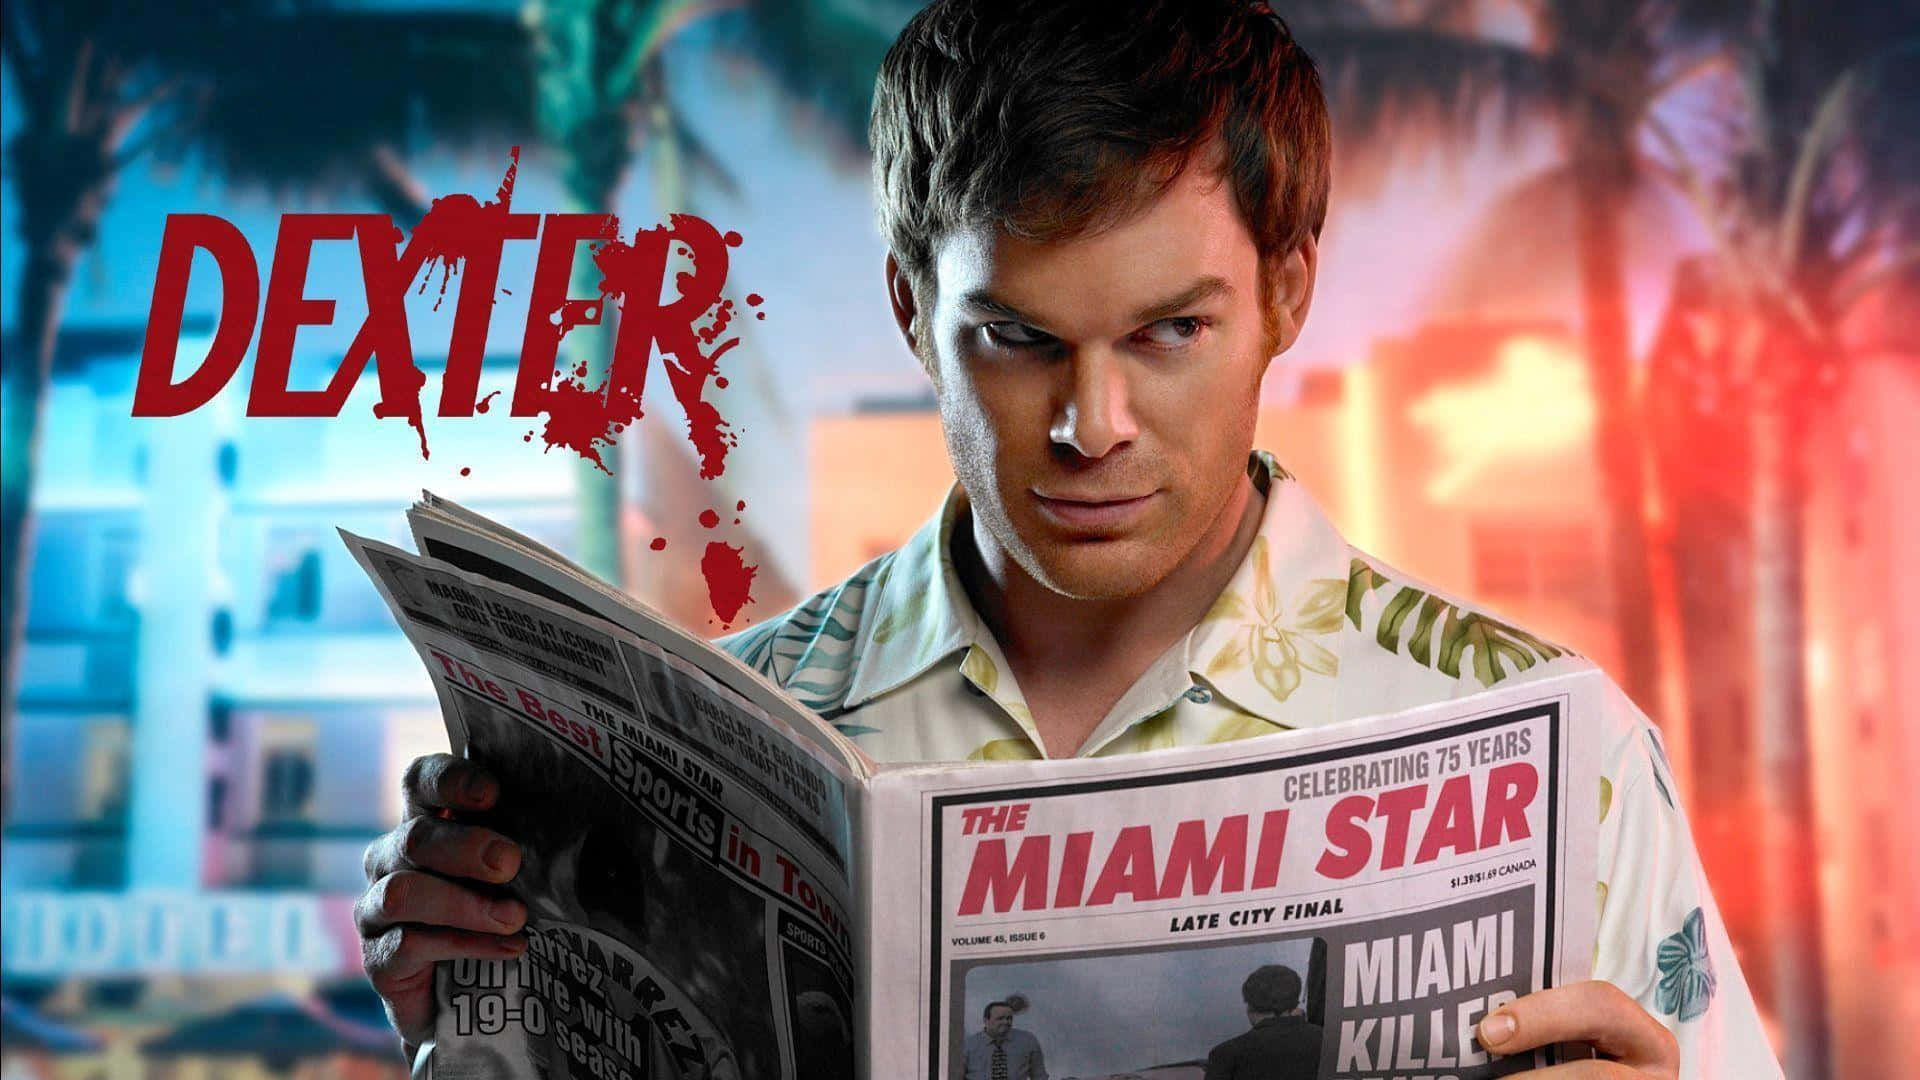 Michaelc. Hall. Is An American Actor Best Known For His Role As Dexter Morgan In The Television Series 